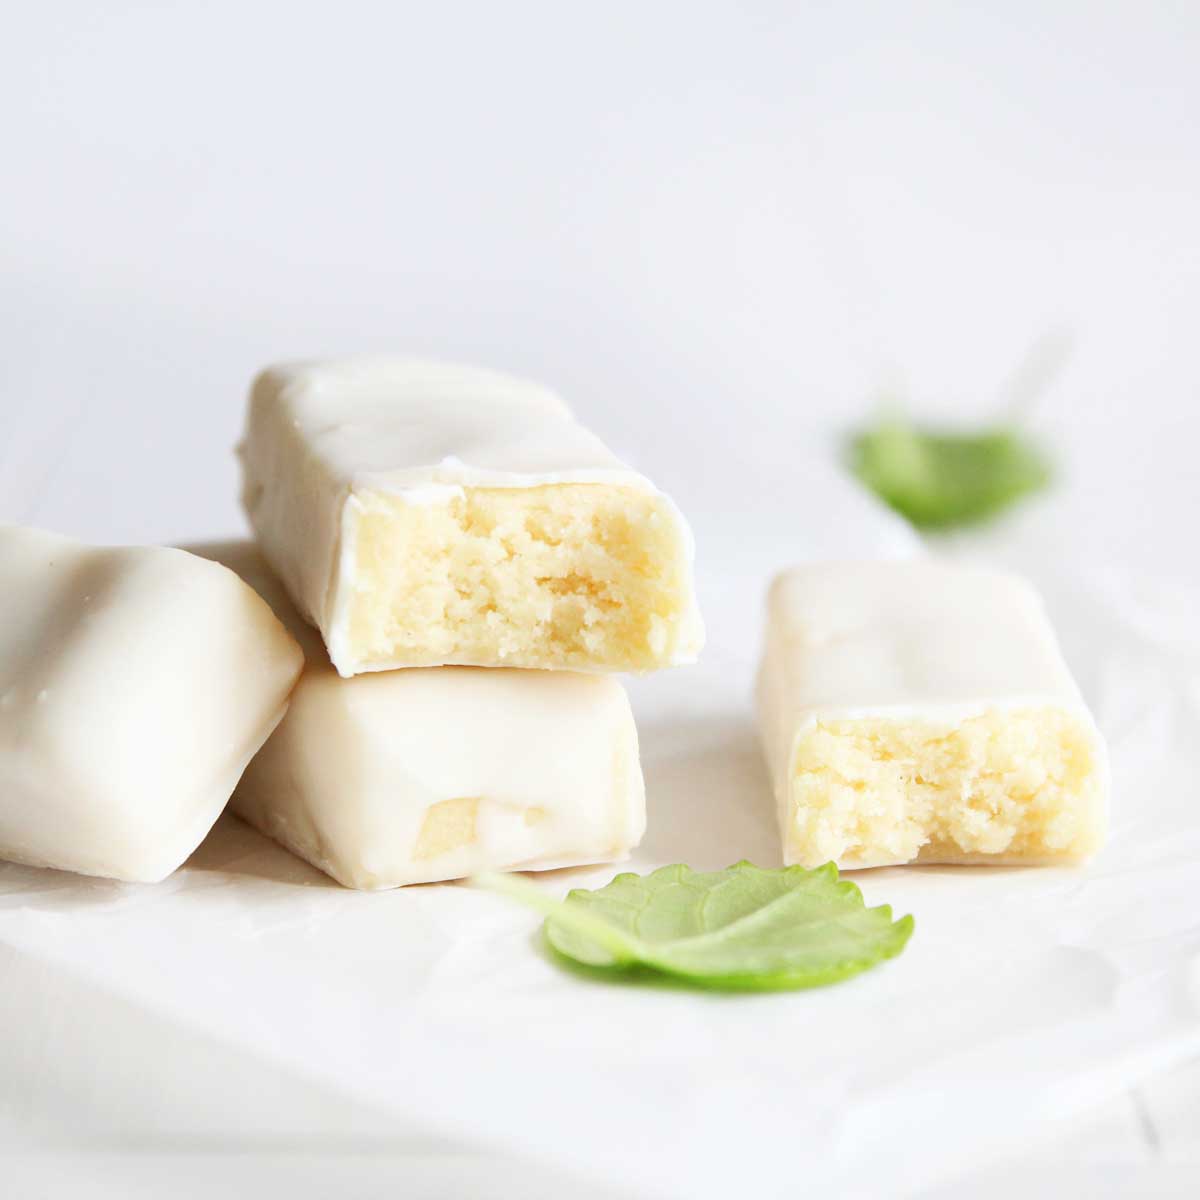 Healthy Homemade Lemon Protein Bars made with Collagen Peptides - cauliflower